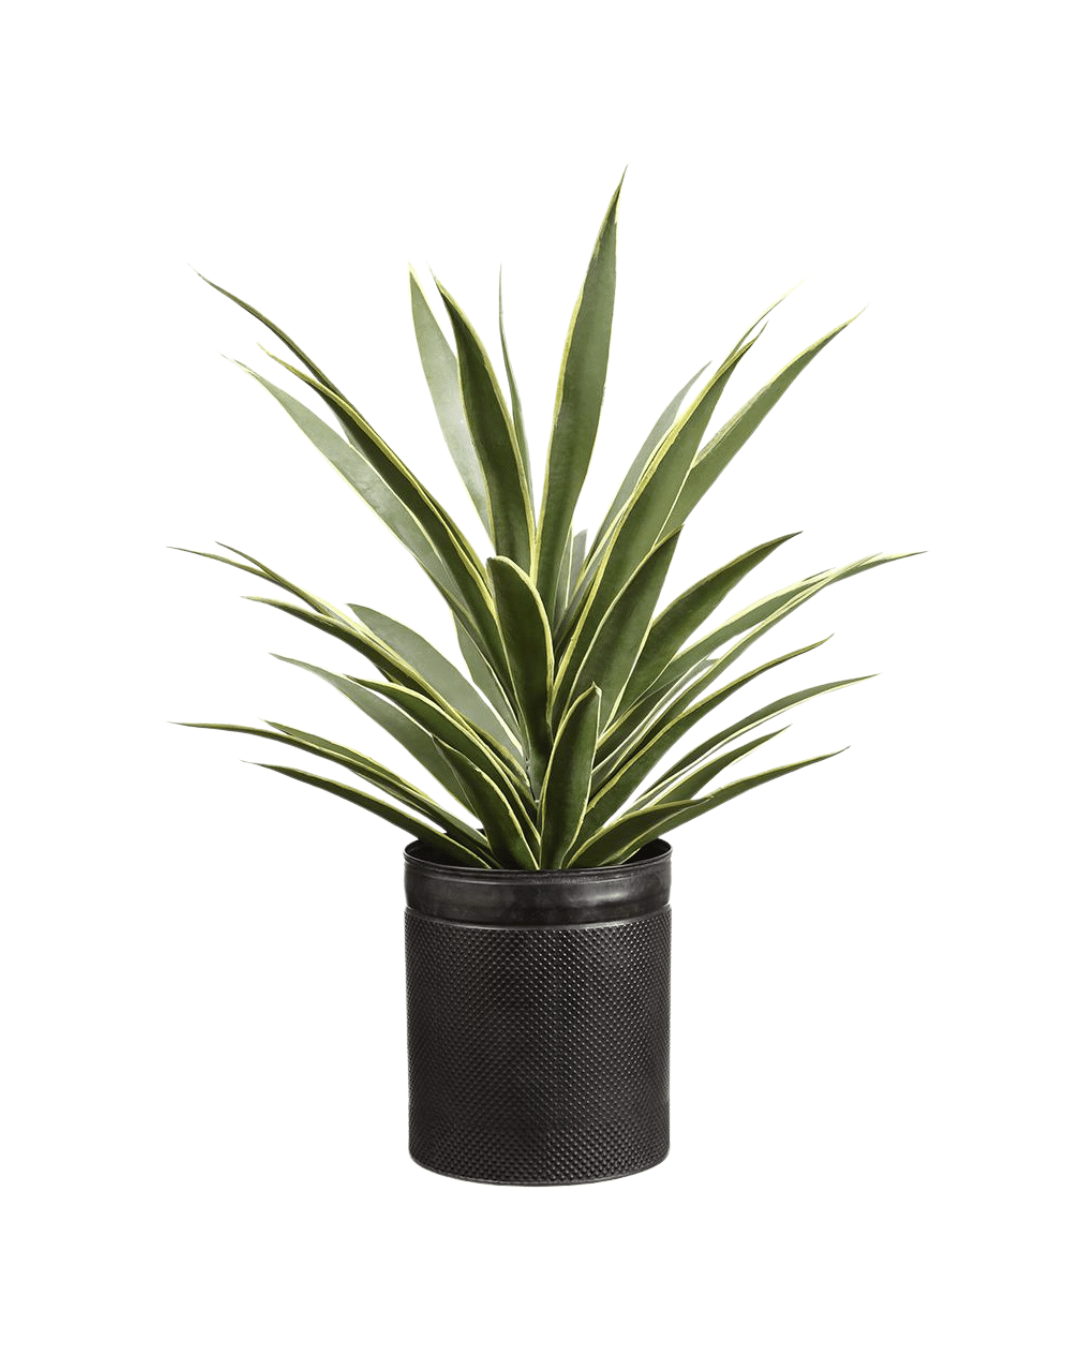 A 29" Yucca Plant with long, upright leaves growing in a textured black pot isolated on a white background, ideal for a Scottsdale Arizona bungalow.